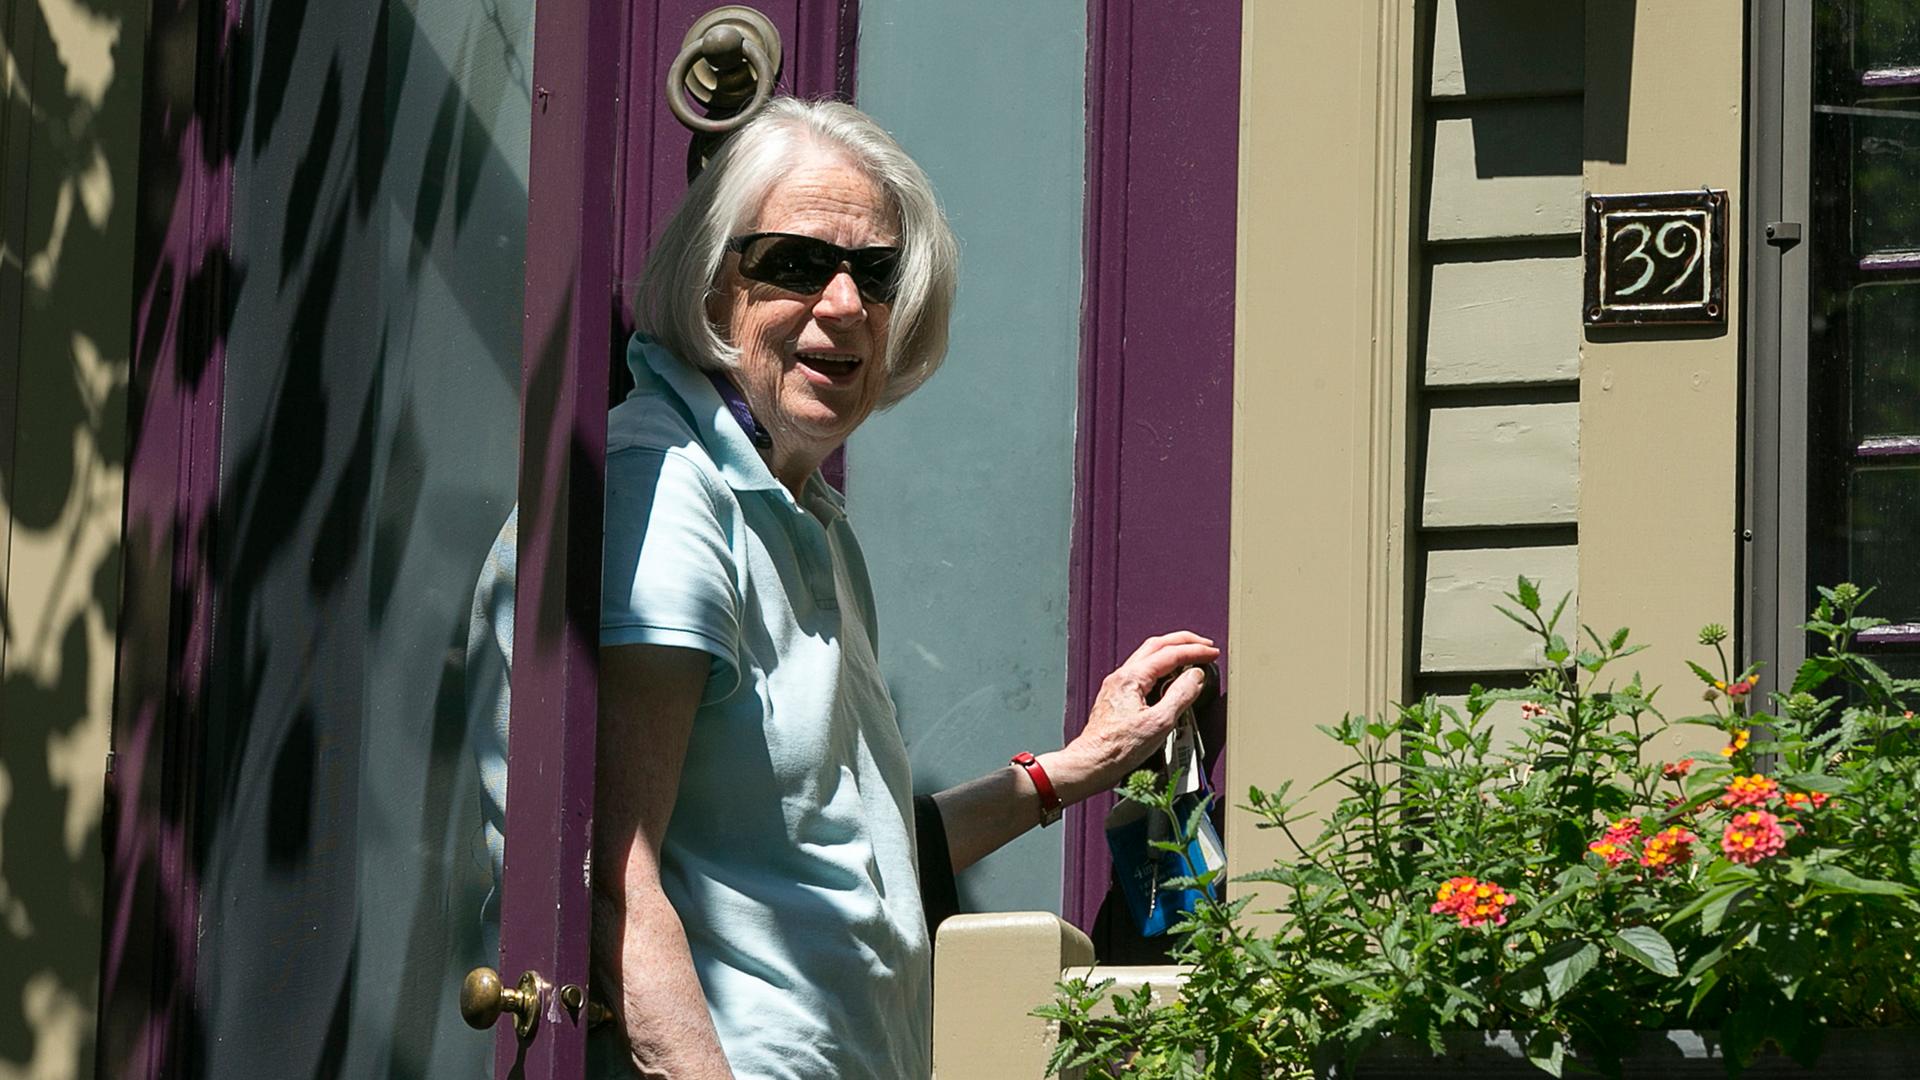 Nancy Curtis, mother of American writer Peter Theo Curtis, briefly answers reporters' questions outside her home in Cambridge, Massachusetts August 25, 2014. Al Qaeda-linked militants in Syria on Sunday freed Peter Theo Curtis, who has been missing since 